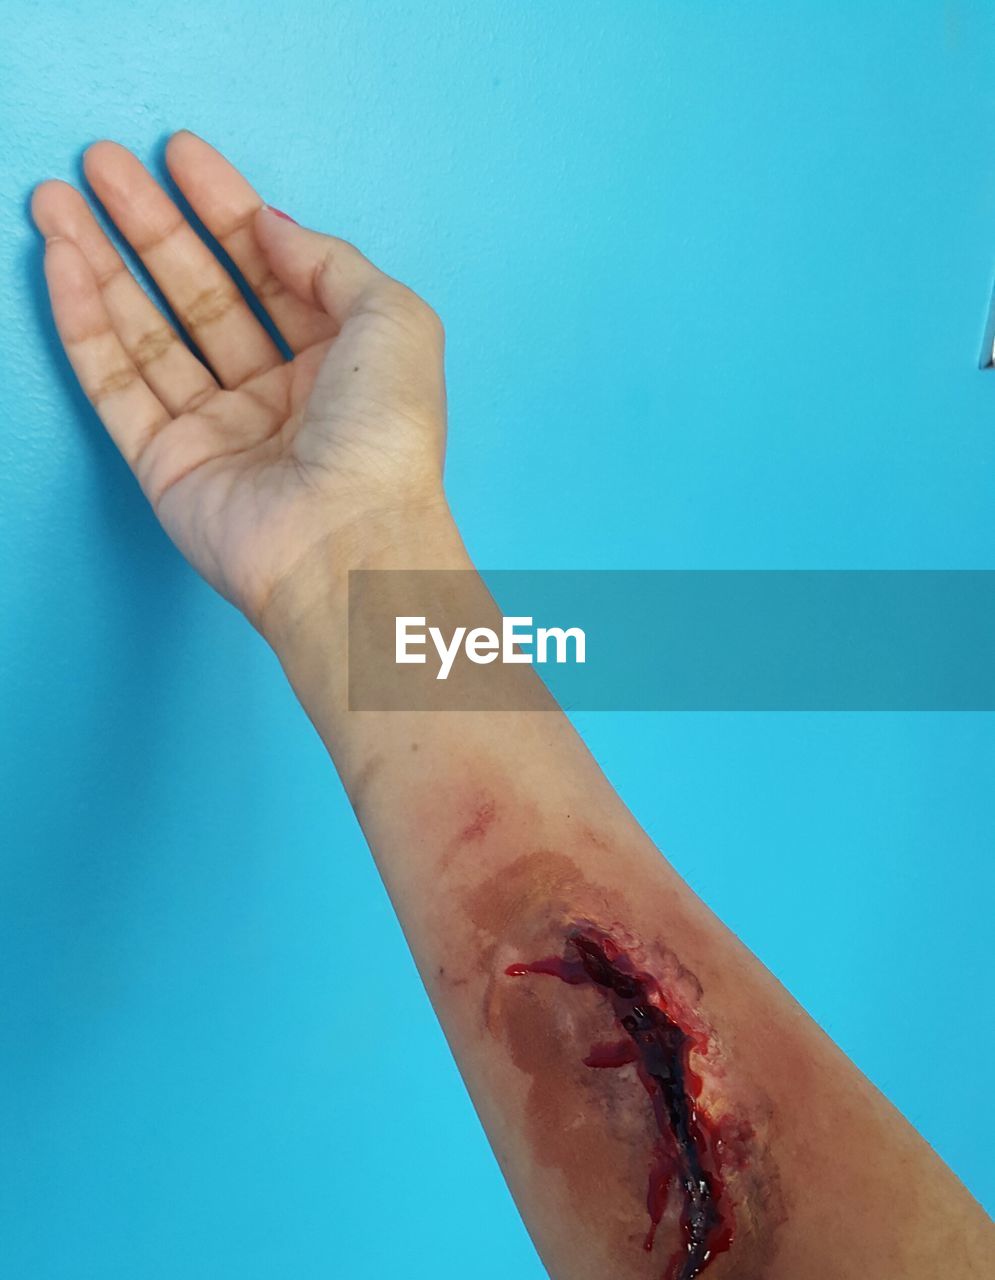 Cropped image of wounded hand on blue wall